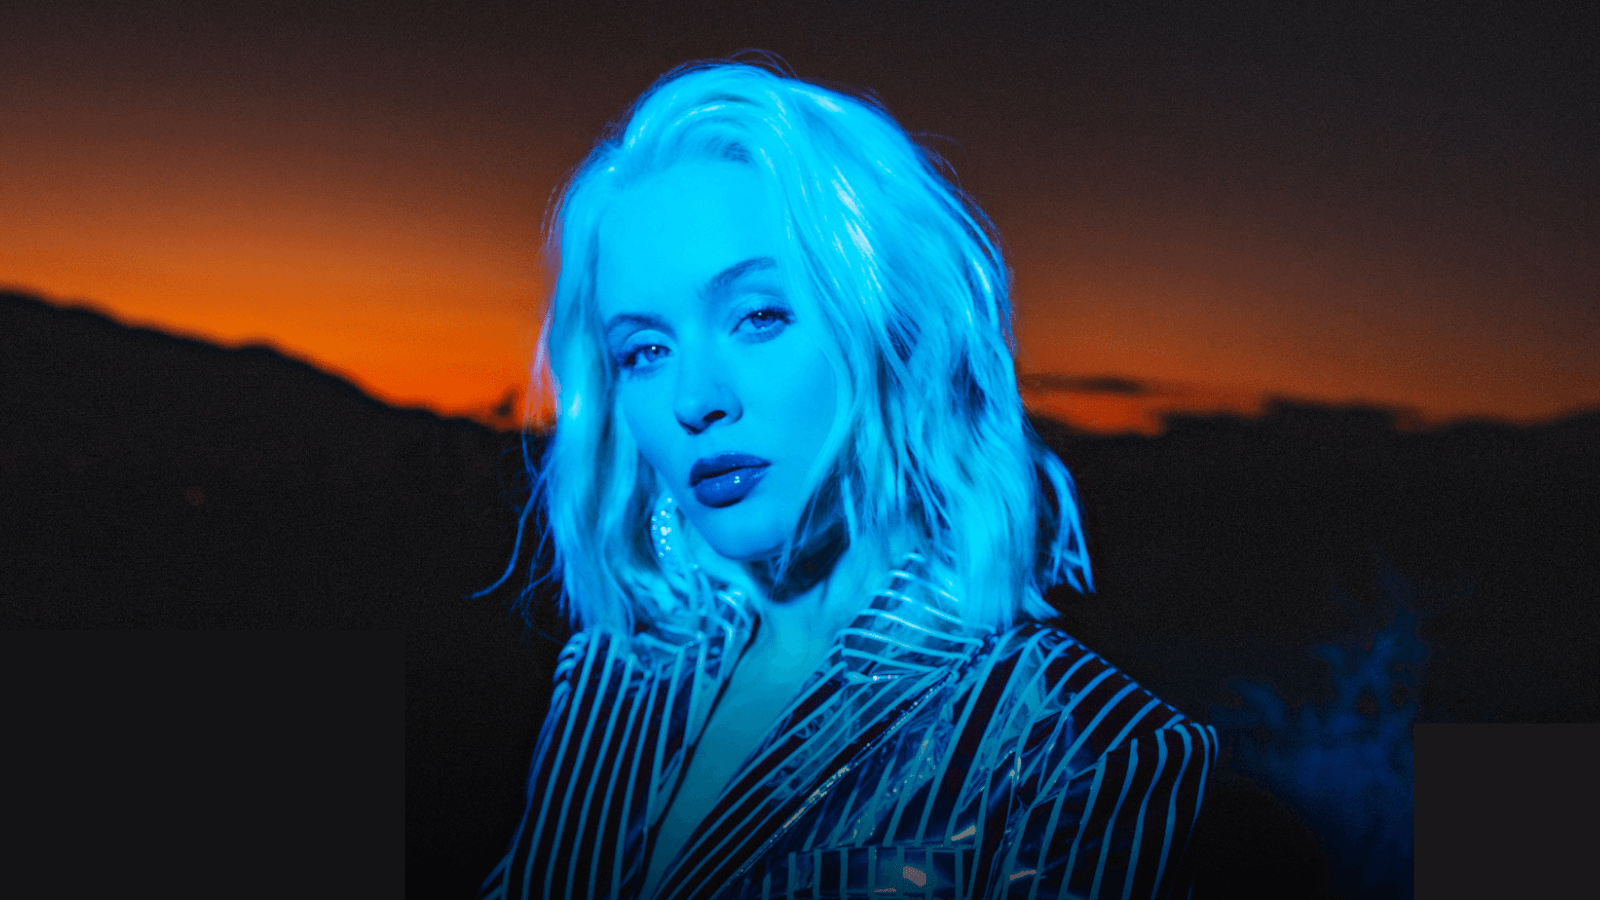 Zara Larsson to Perform at the 2023 Oslo Freedom Forum